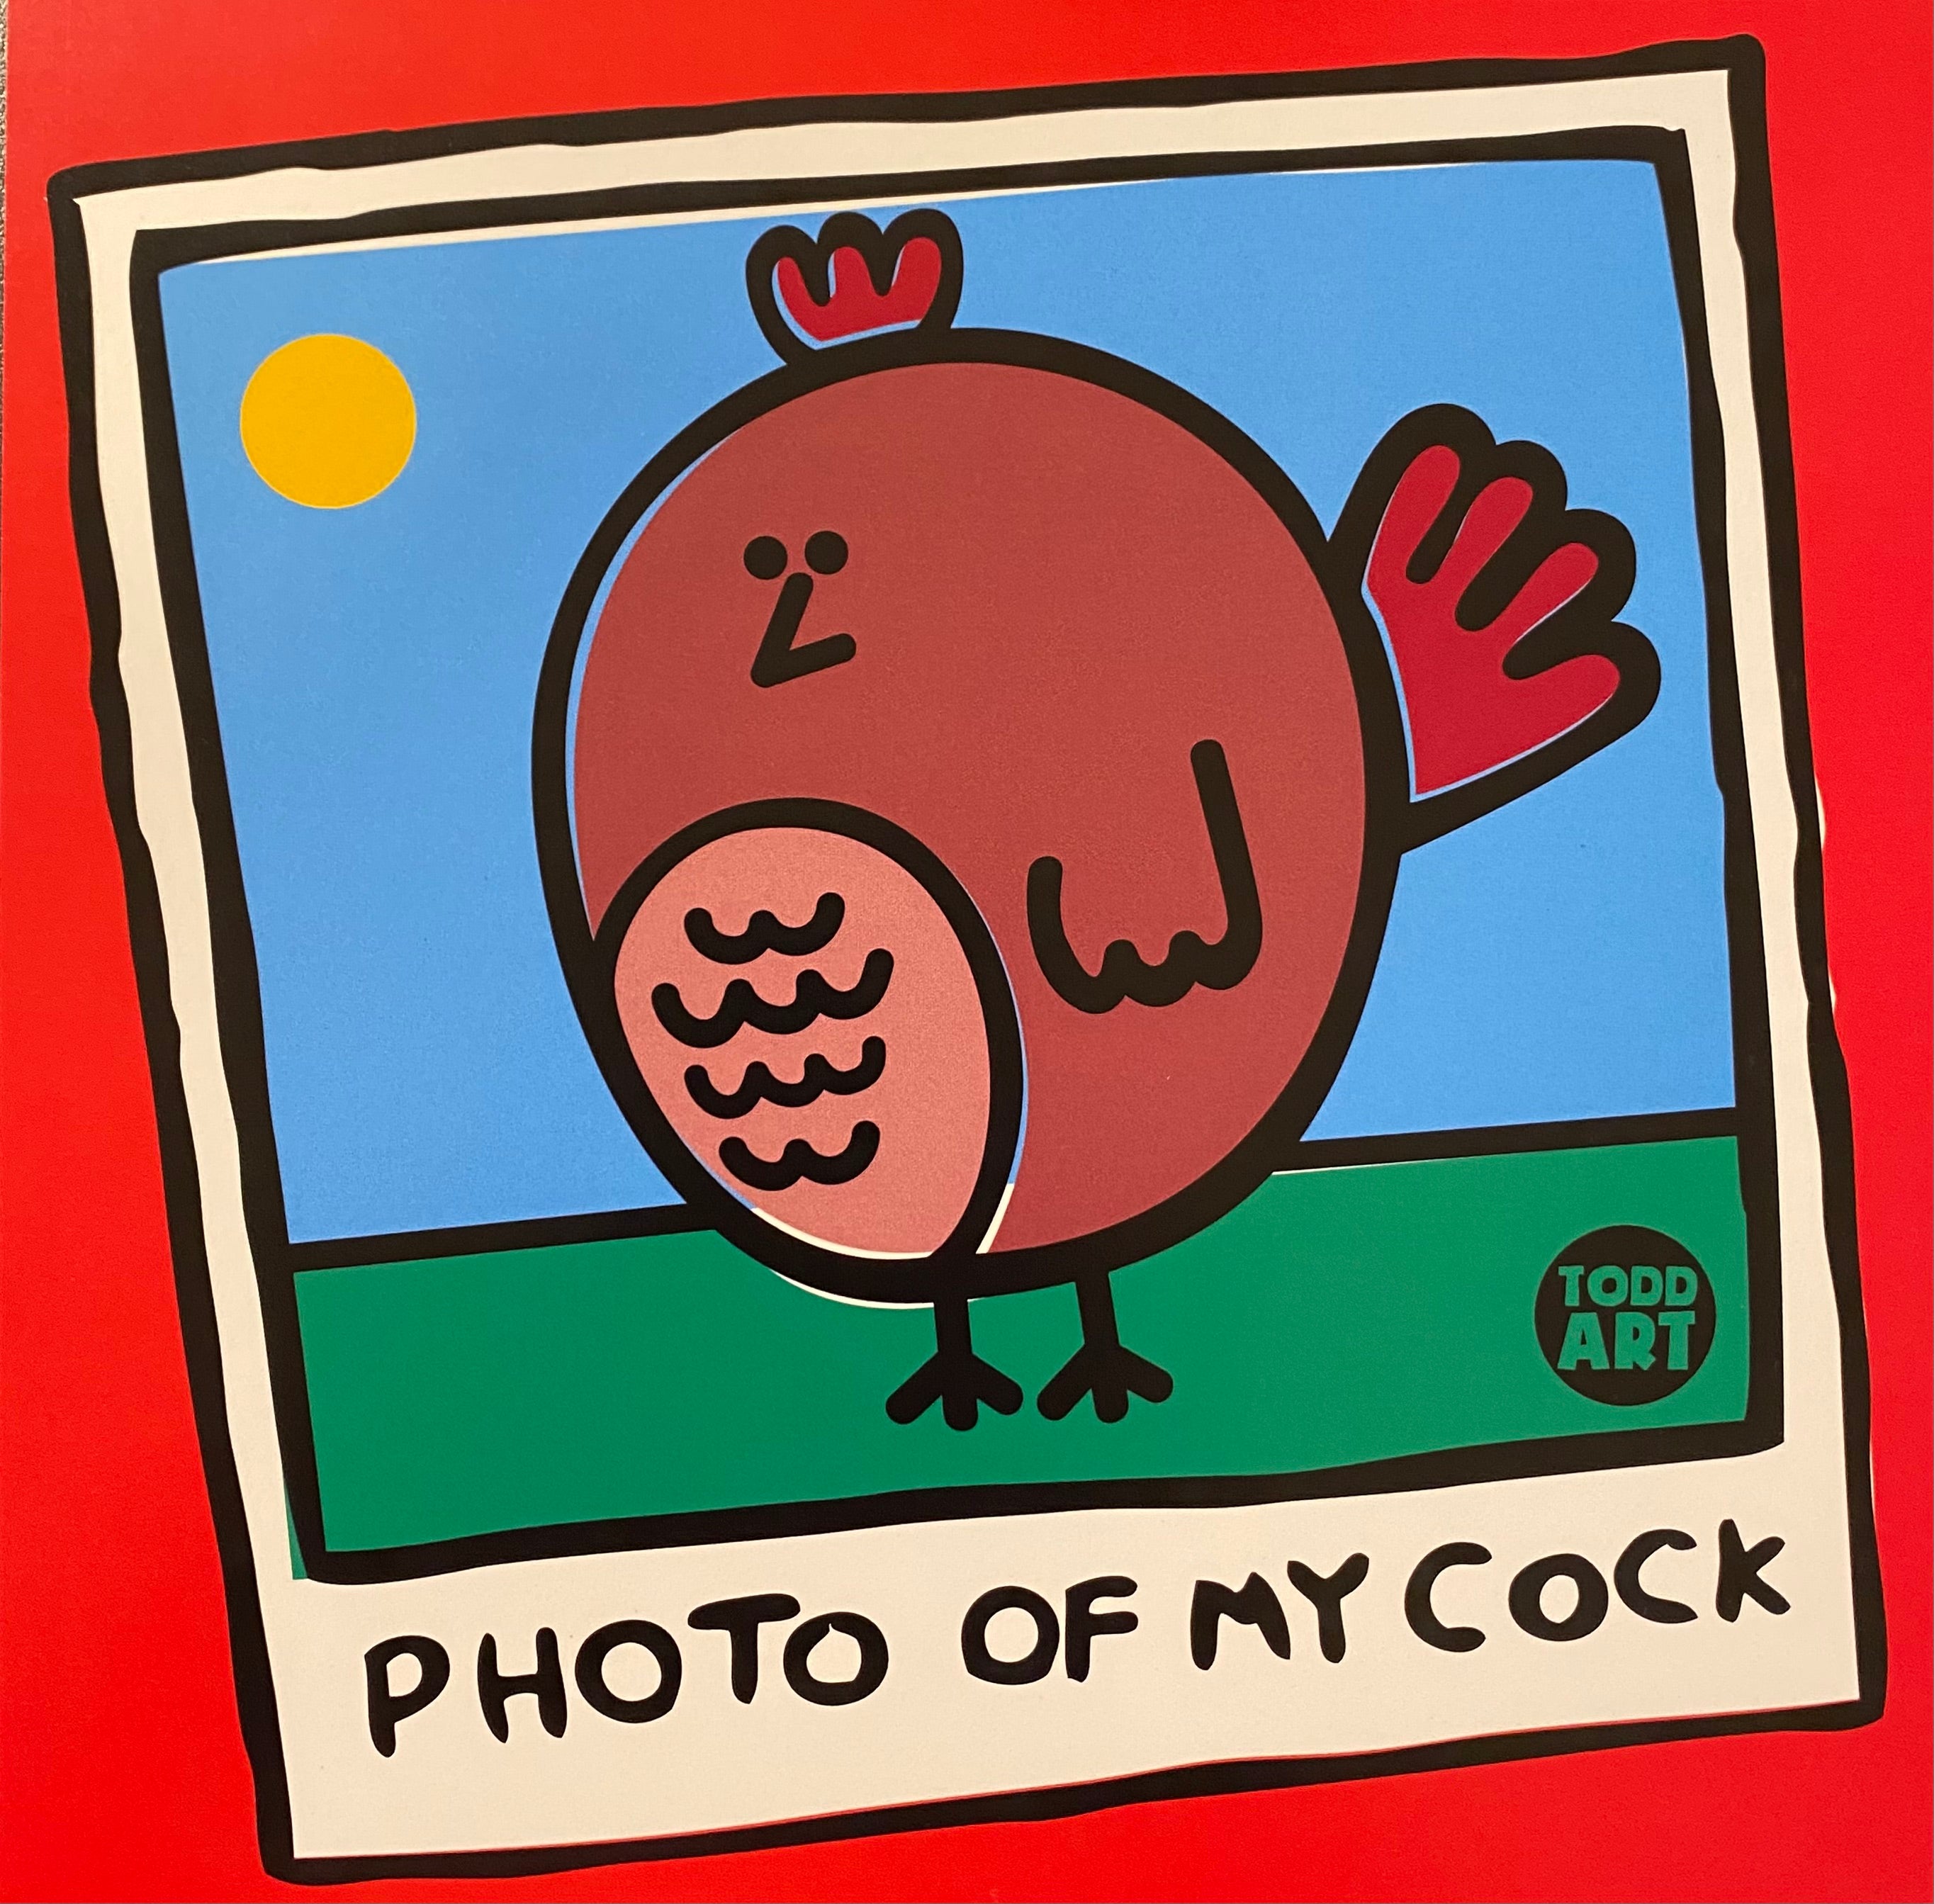 Photo of my Cock